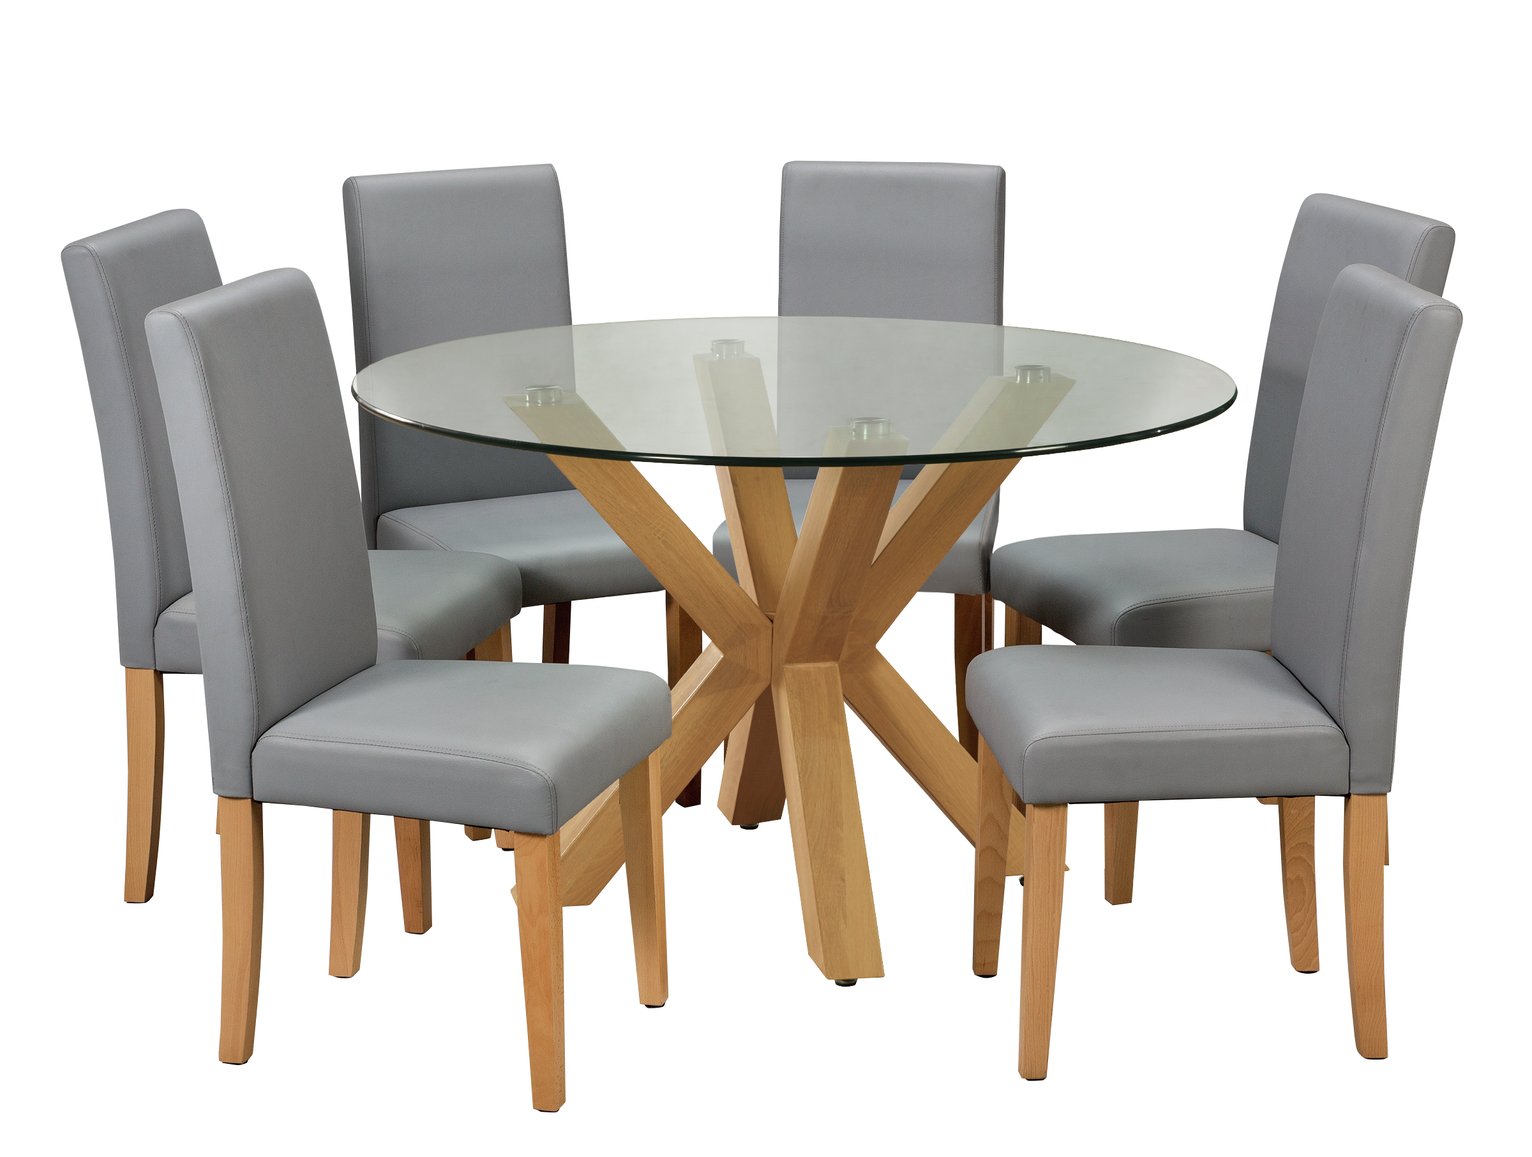 Argos Home Alden Glass Dining Table & 6 Grey Chairs